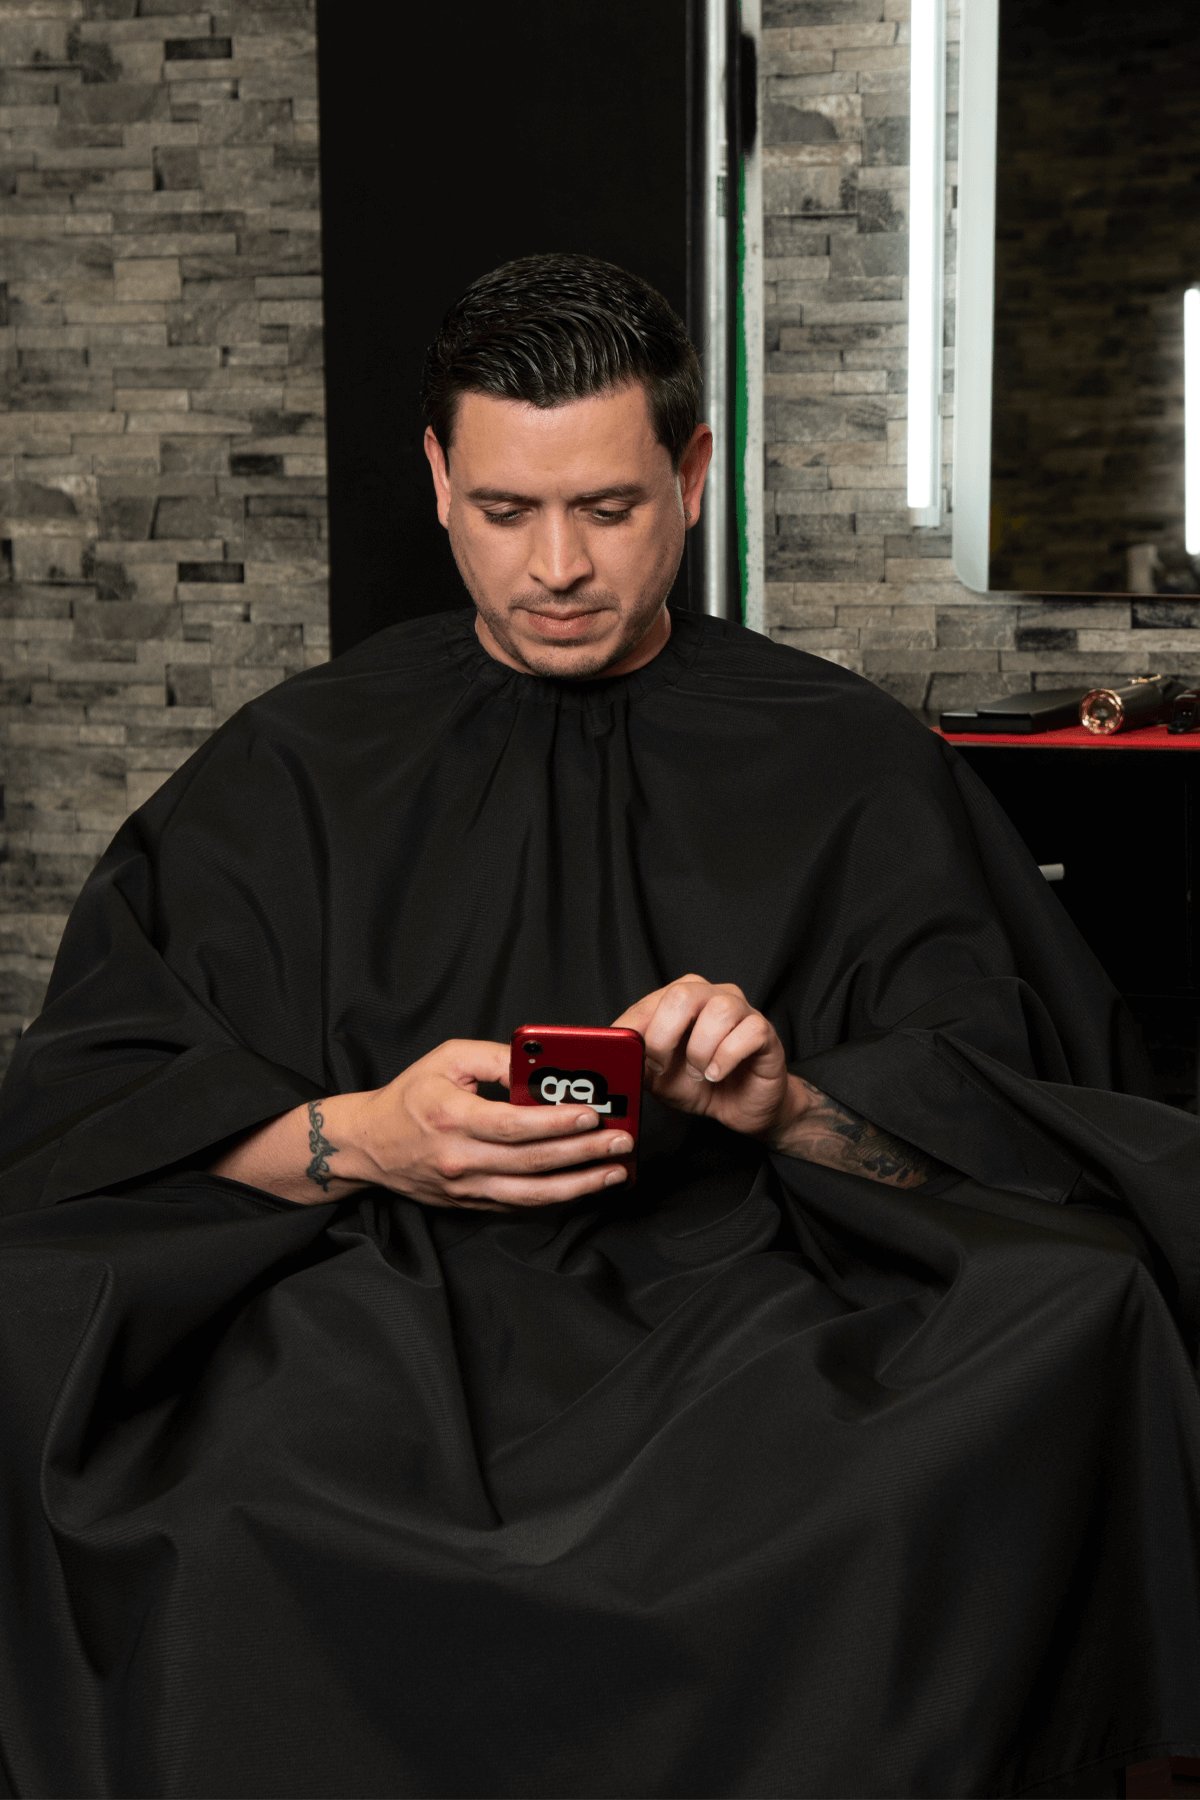 6-PACK Extra Large Barber Capes (Crepe) - Get Yours Now!, , USA